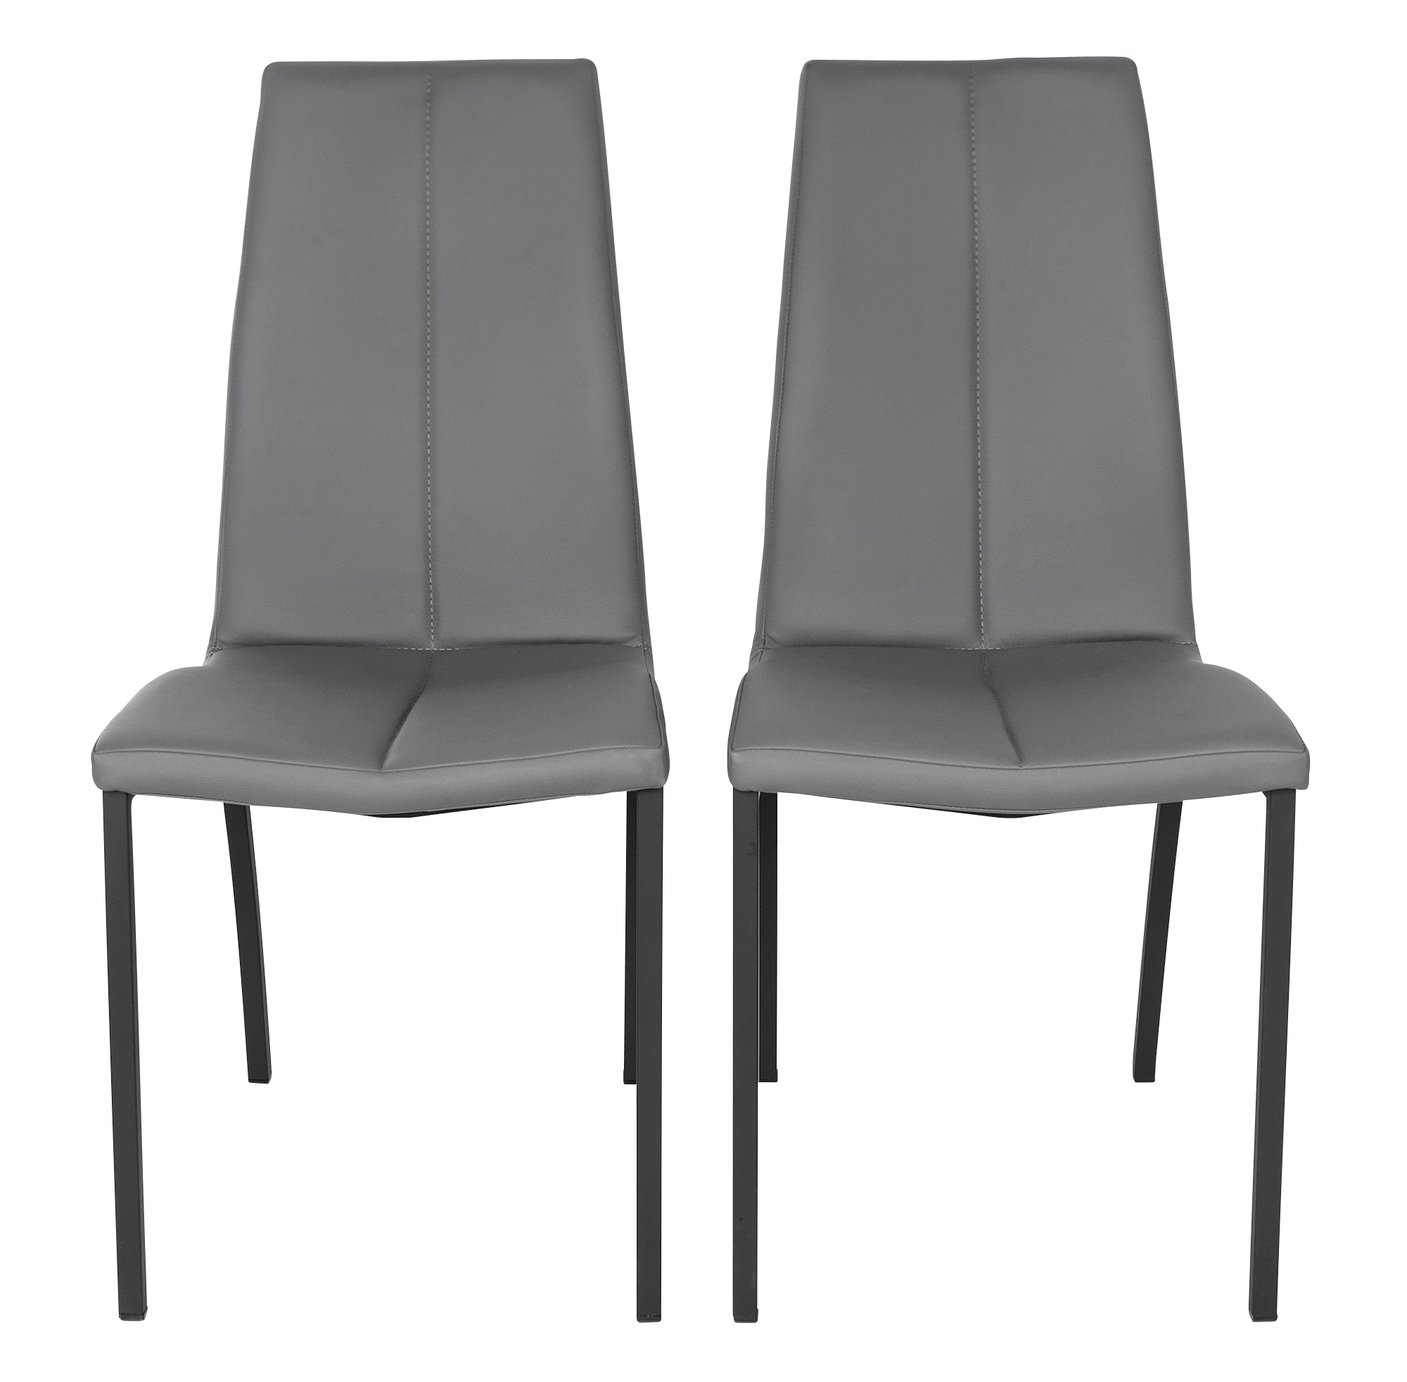 Argos Home Milo Pair of Curve Back Chairs - Charcoal